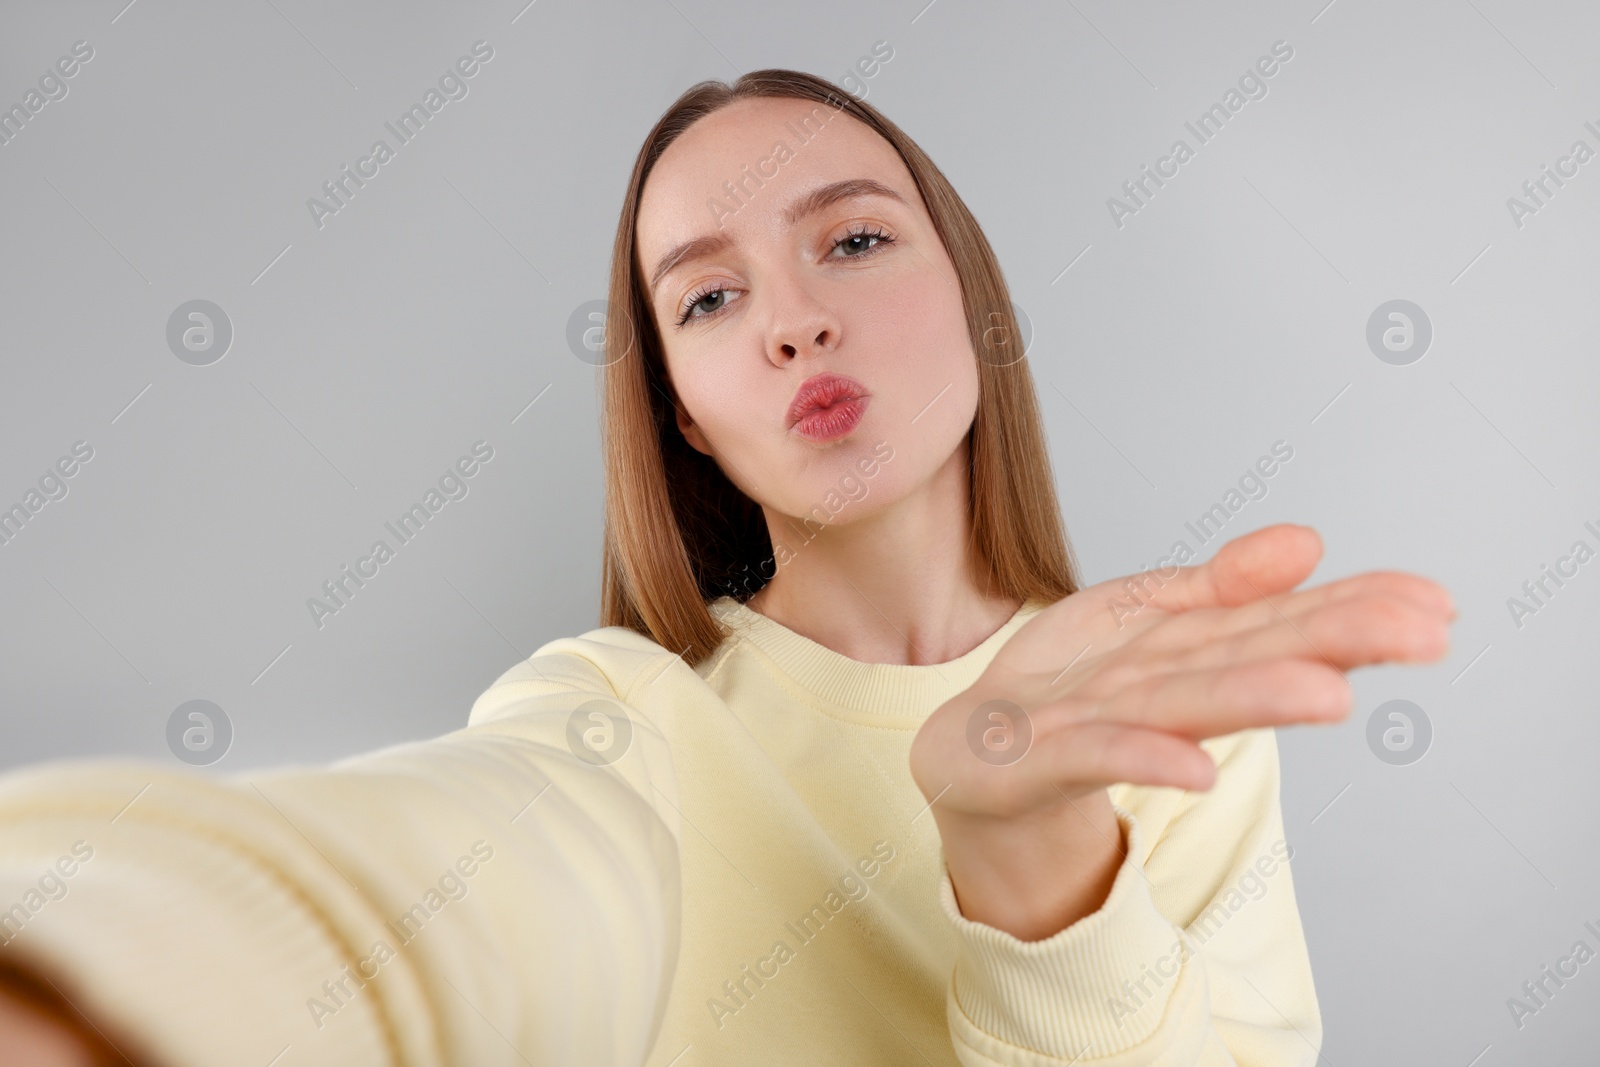 Photo of Young woman taking selfie and blowing kiss on light grey background